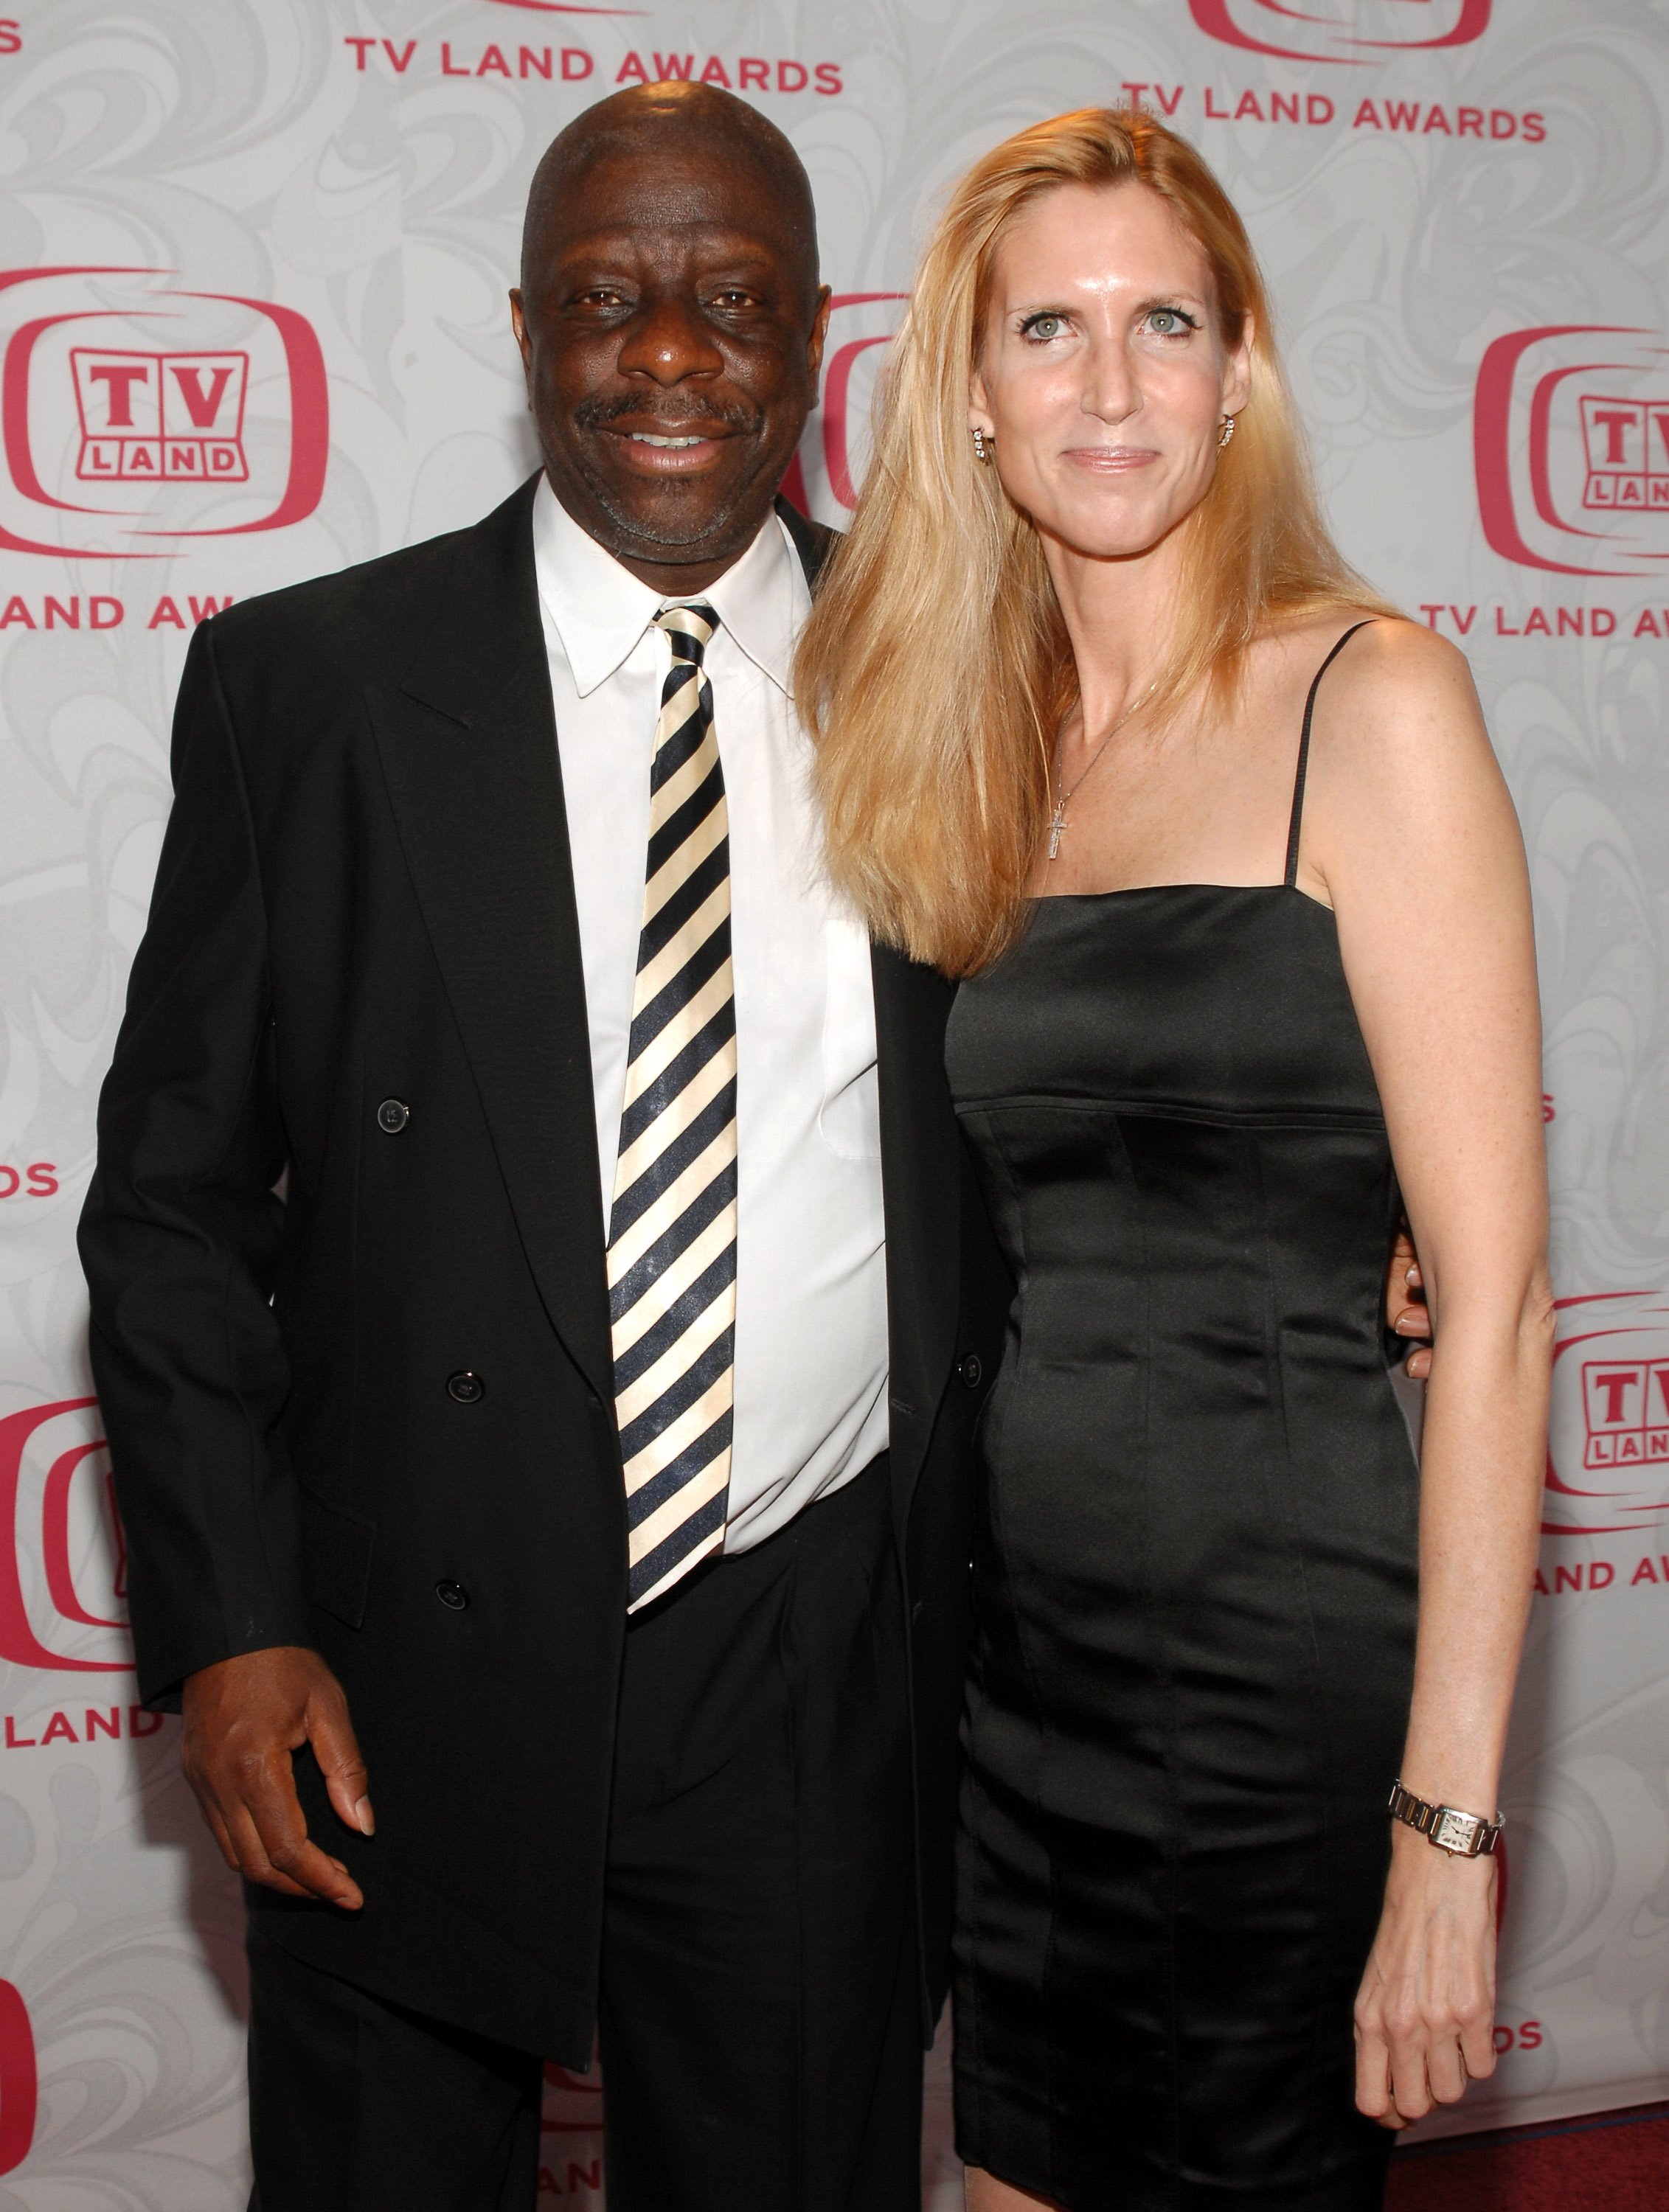 Jimmie Walker and Ann Coulter during the 5th Annual TV Land Awards at Barker Hanger on April 22, 2007 in Santa Monica, California | Photo: Getty Images